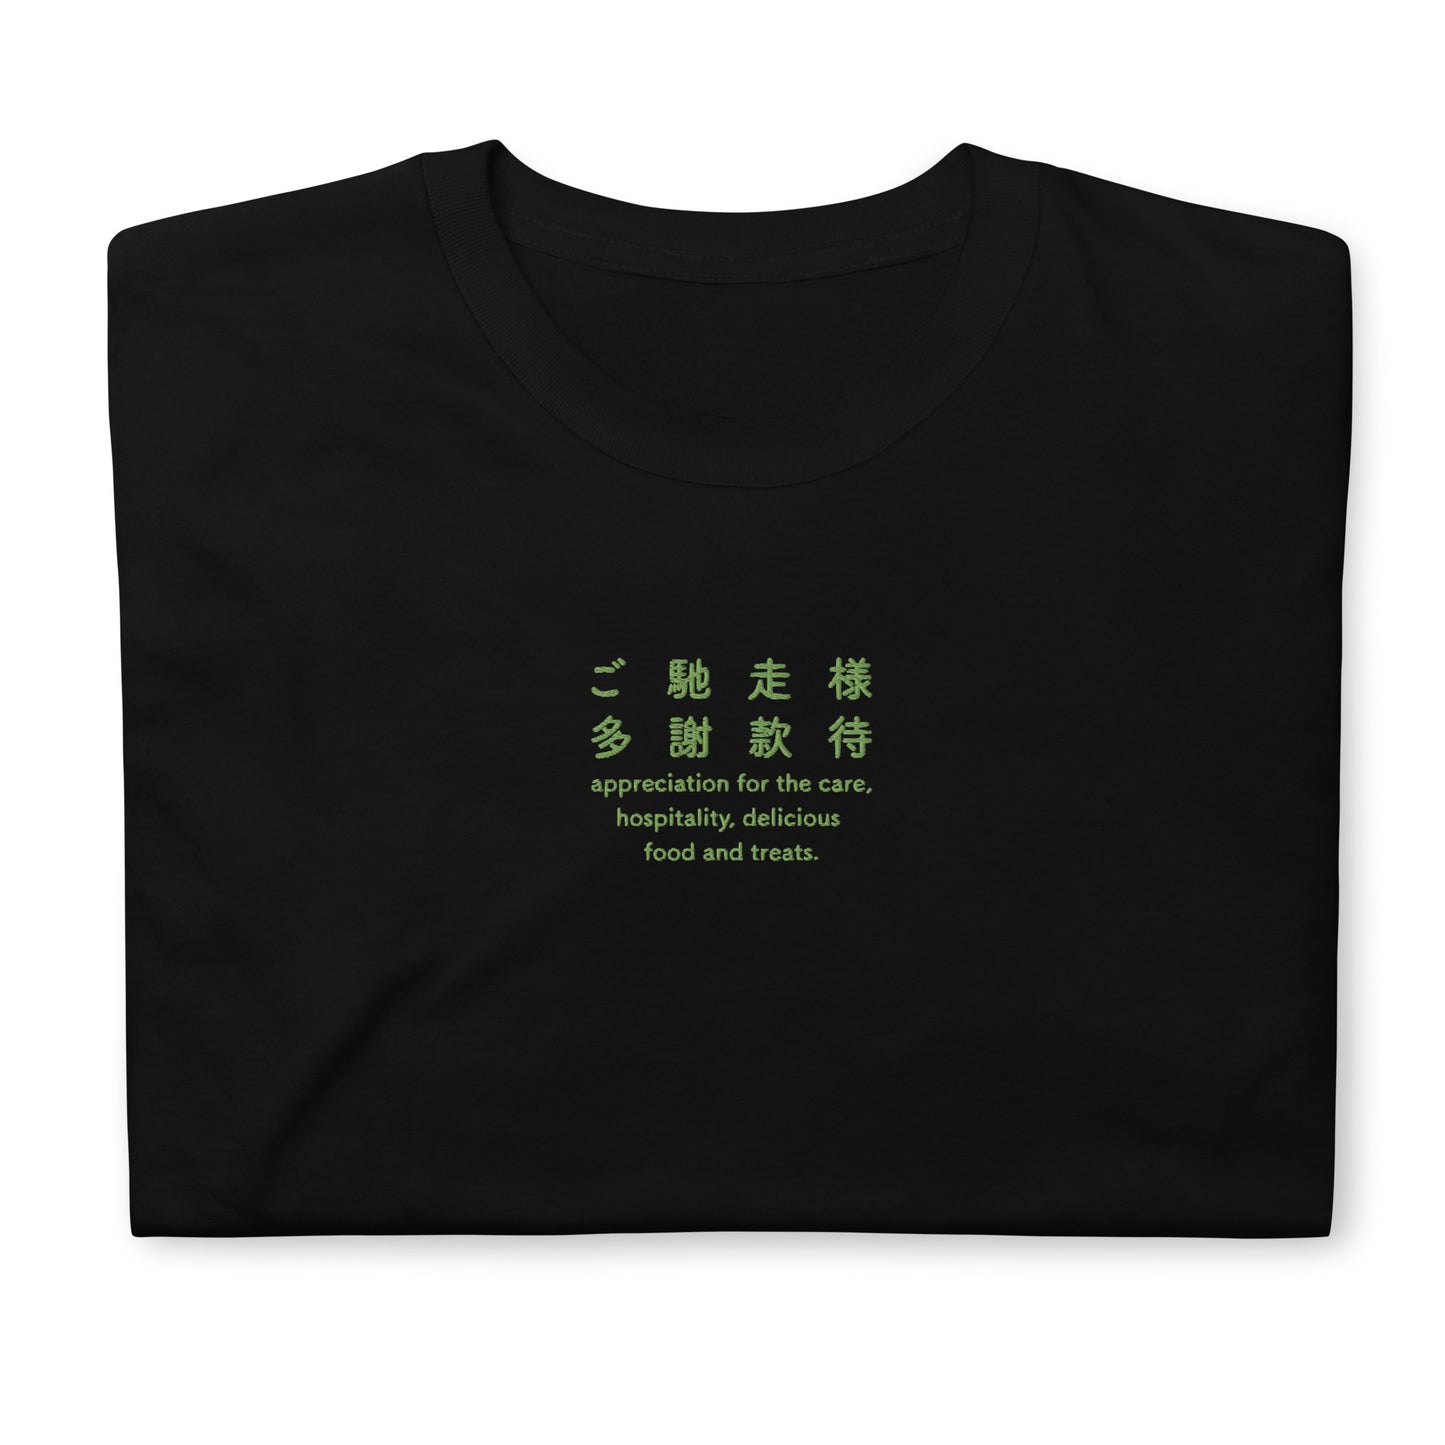 Black High Quality Tee - Front Design with an Green Embroidery "Gochisosama" in Japanese,Chinese and English